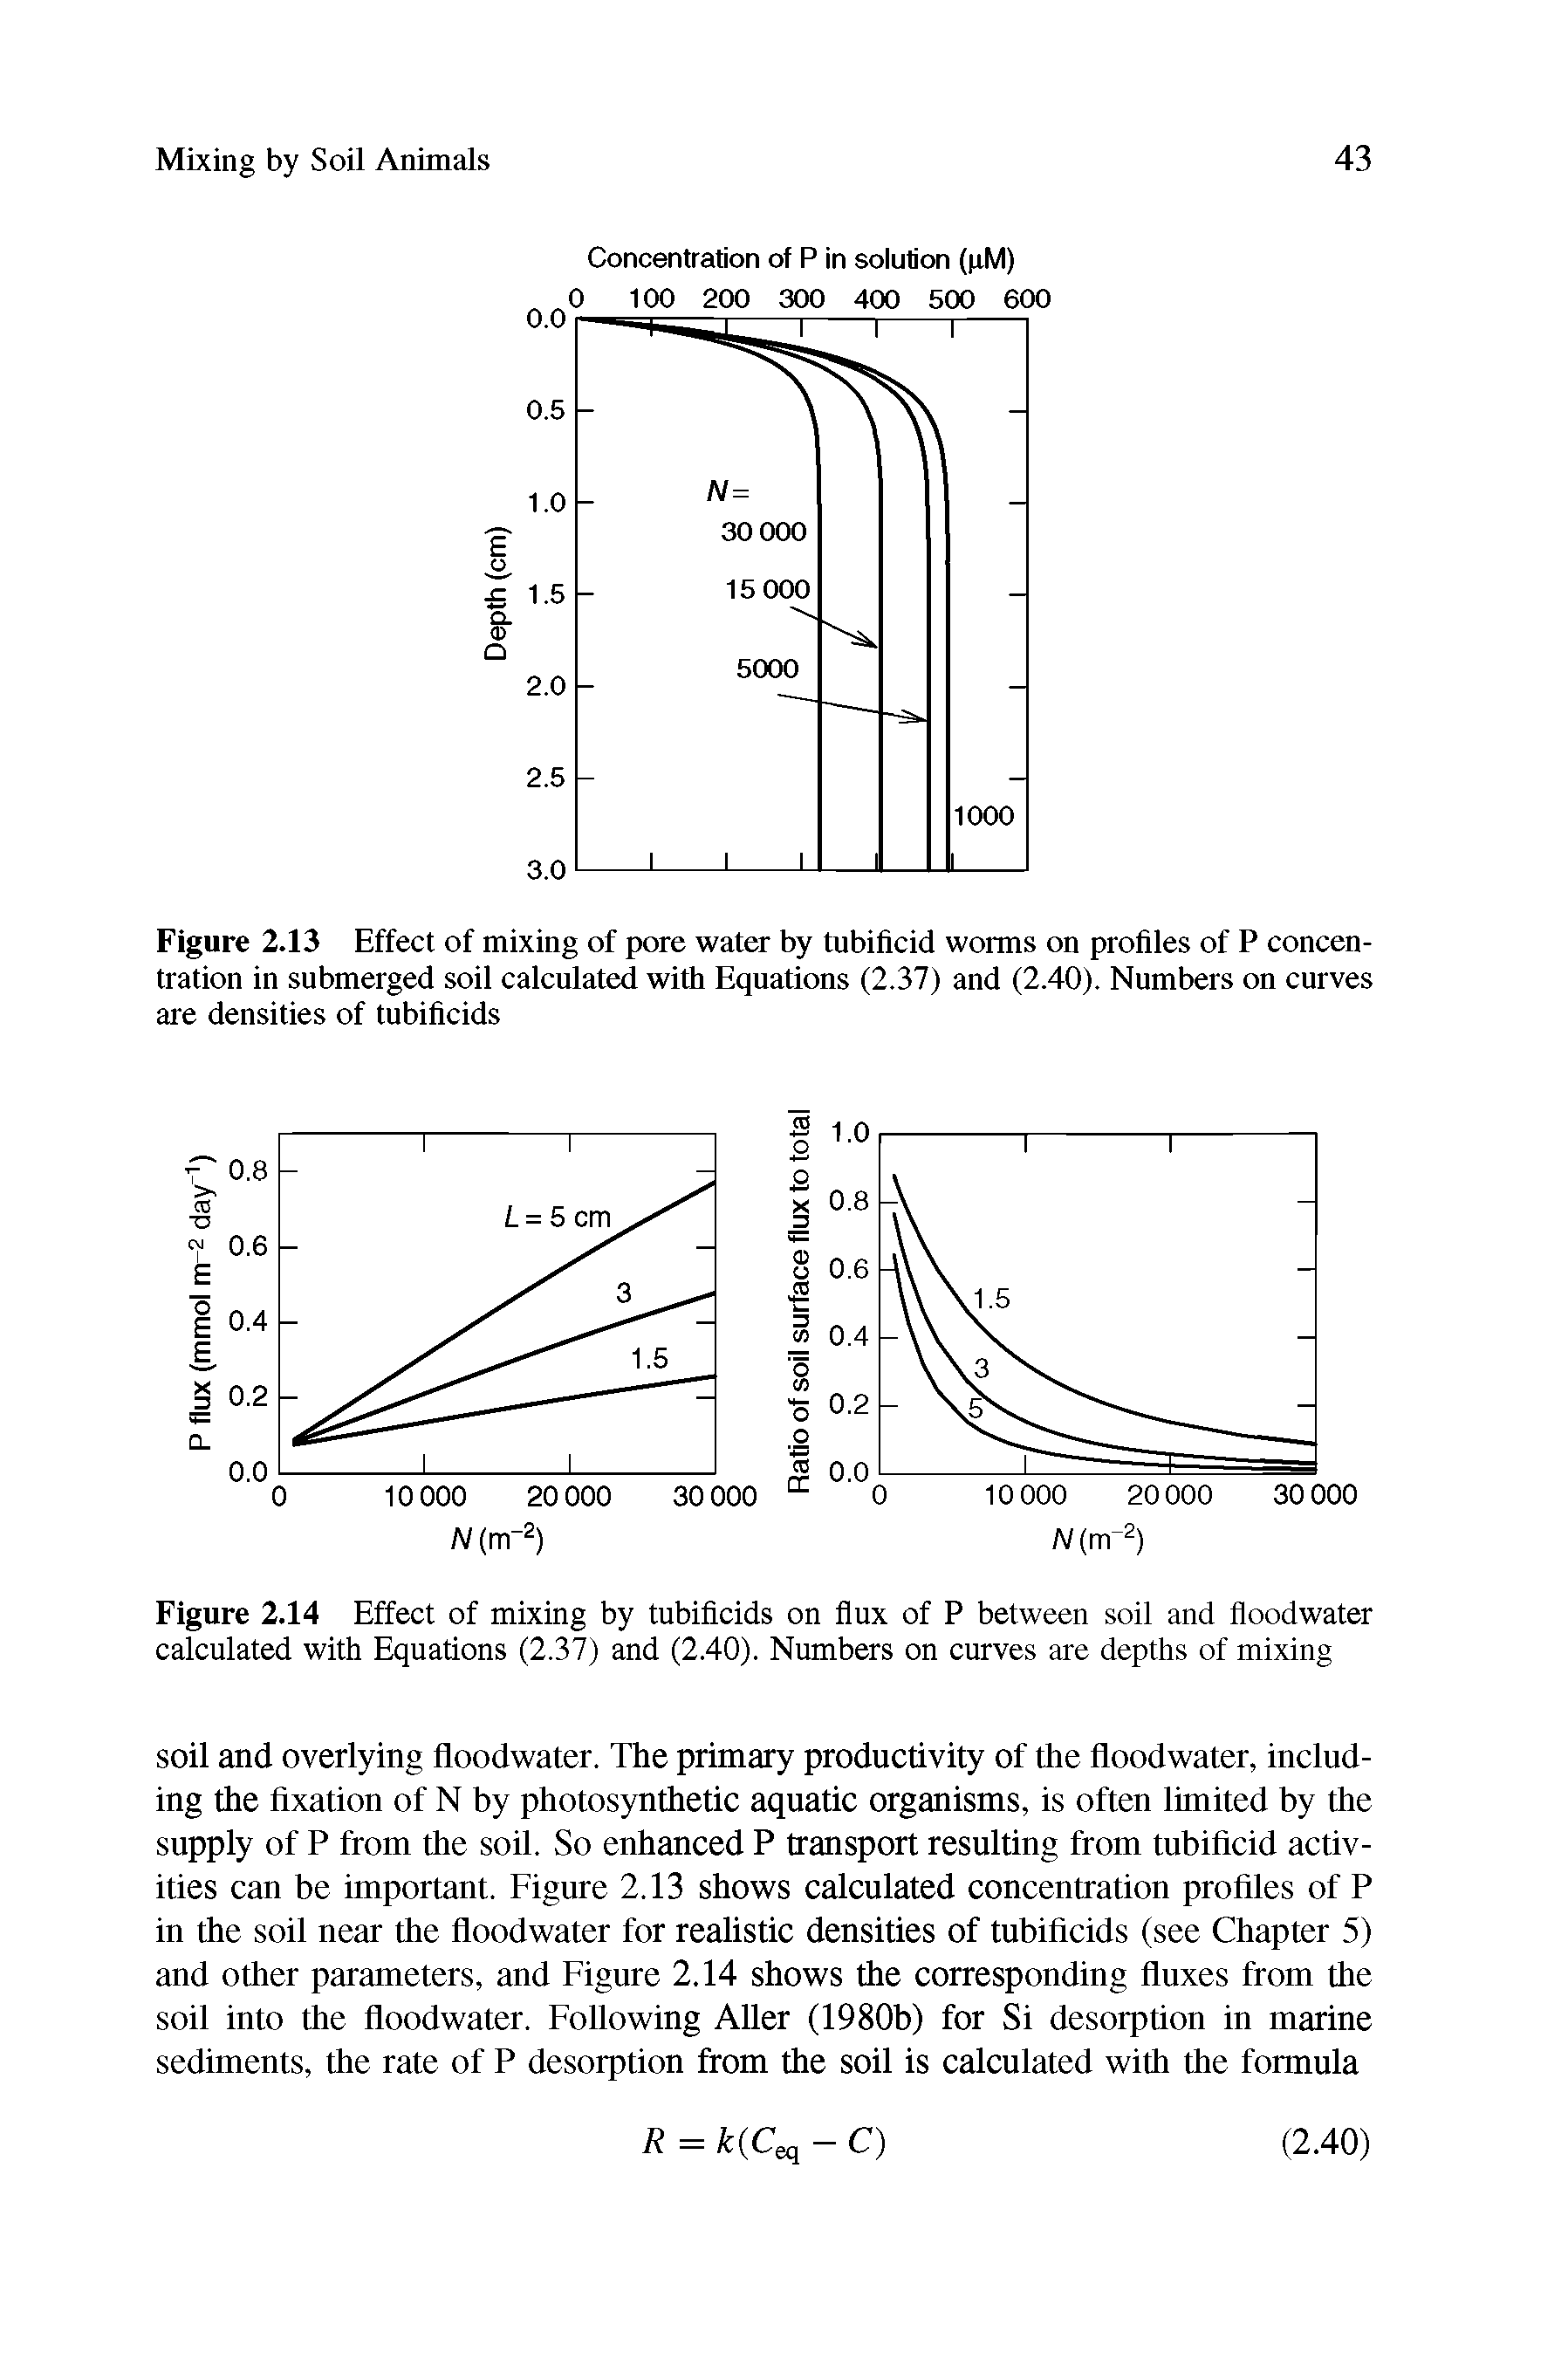 Figure 2.13 Effect of mixing of pore water by tubificid worms on profiles of P concentration in submerged soil calculated with Equations (2.37) and (2.40). Numbers on curves are densities of tubificids...